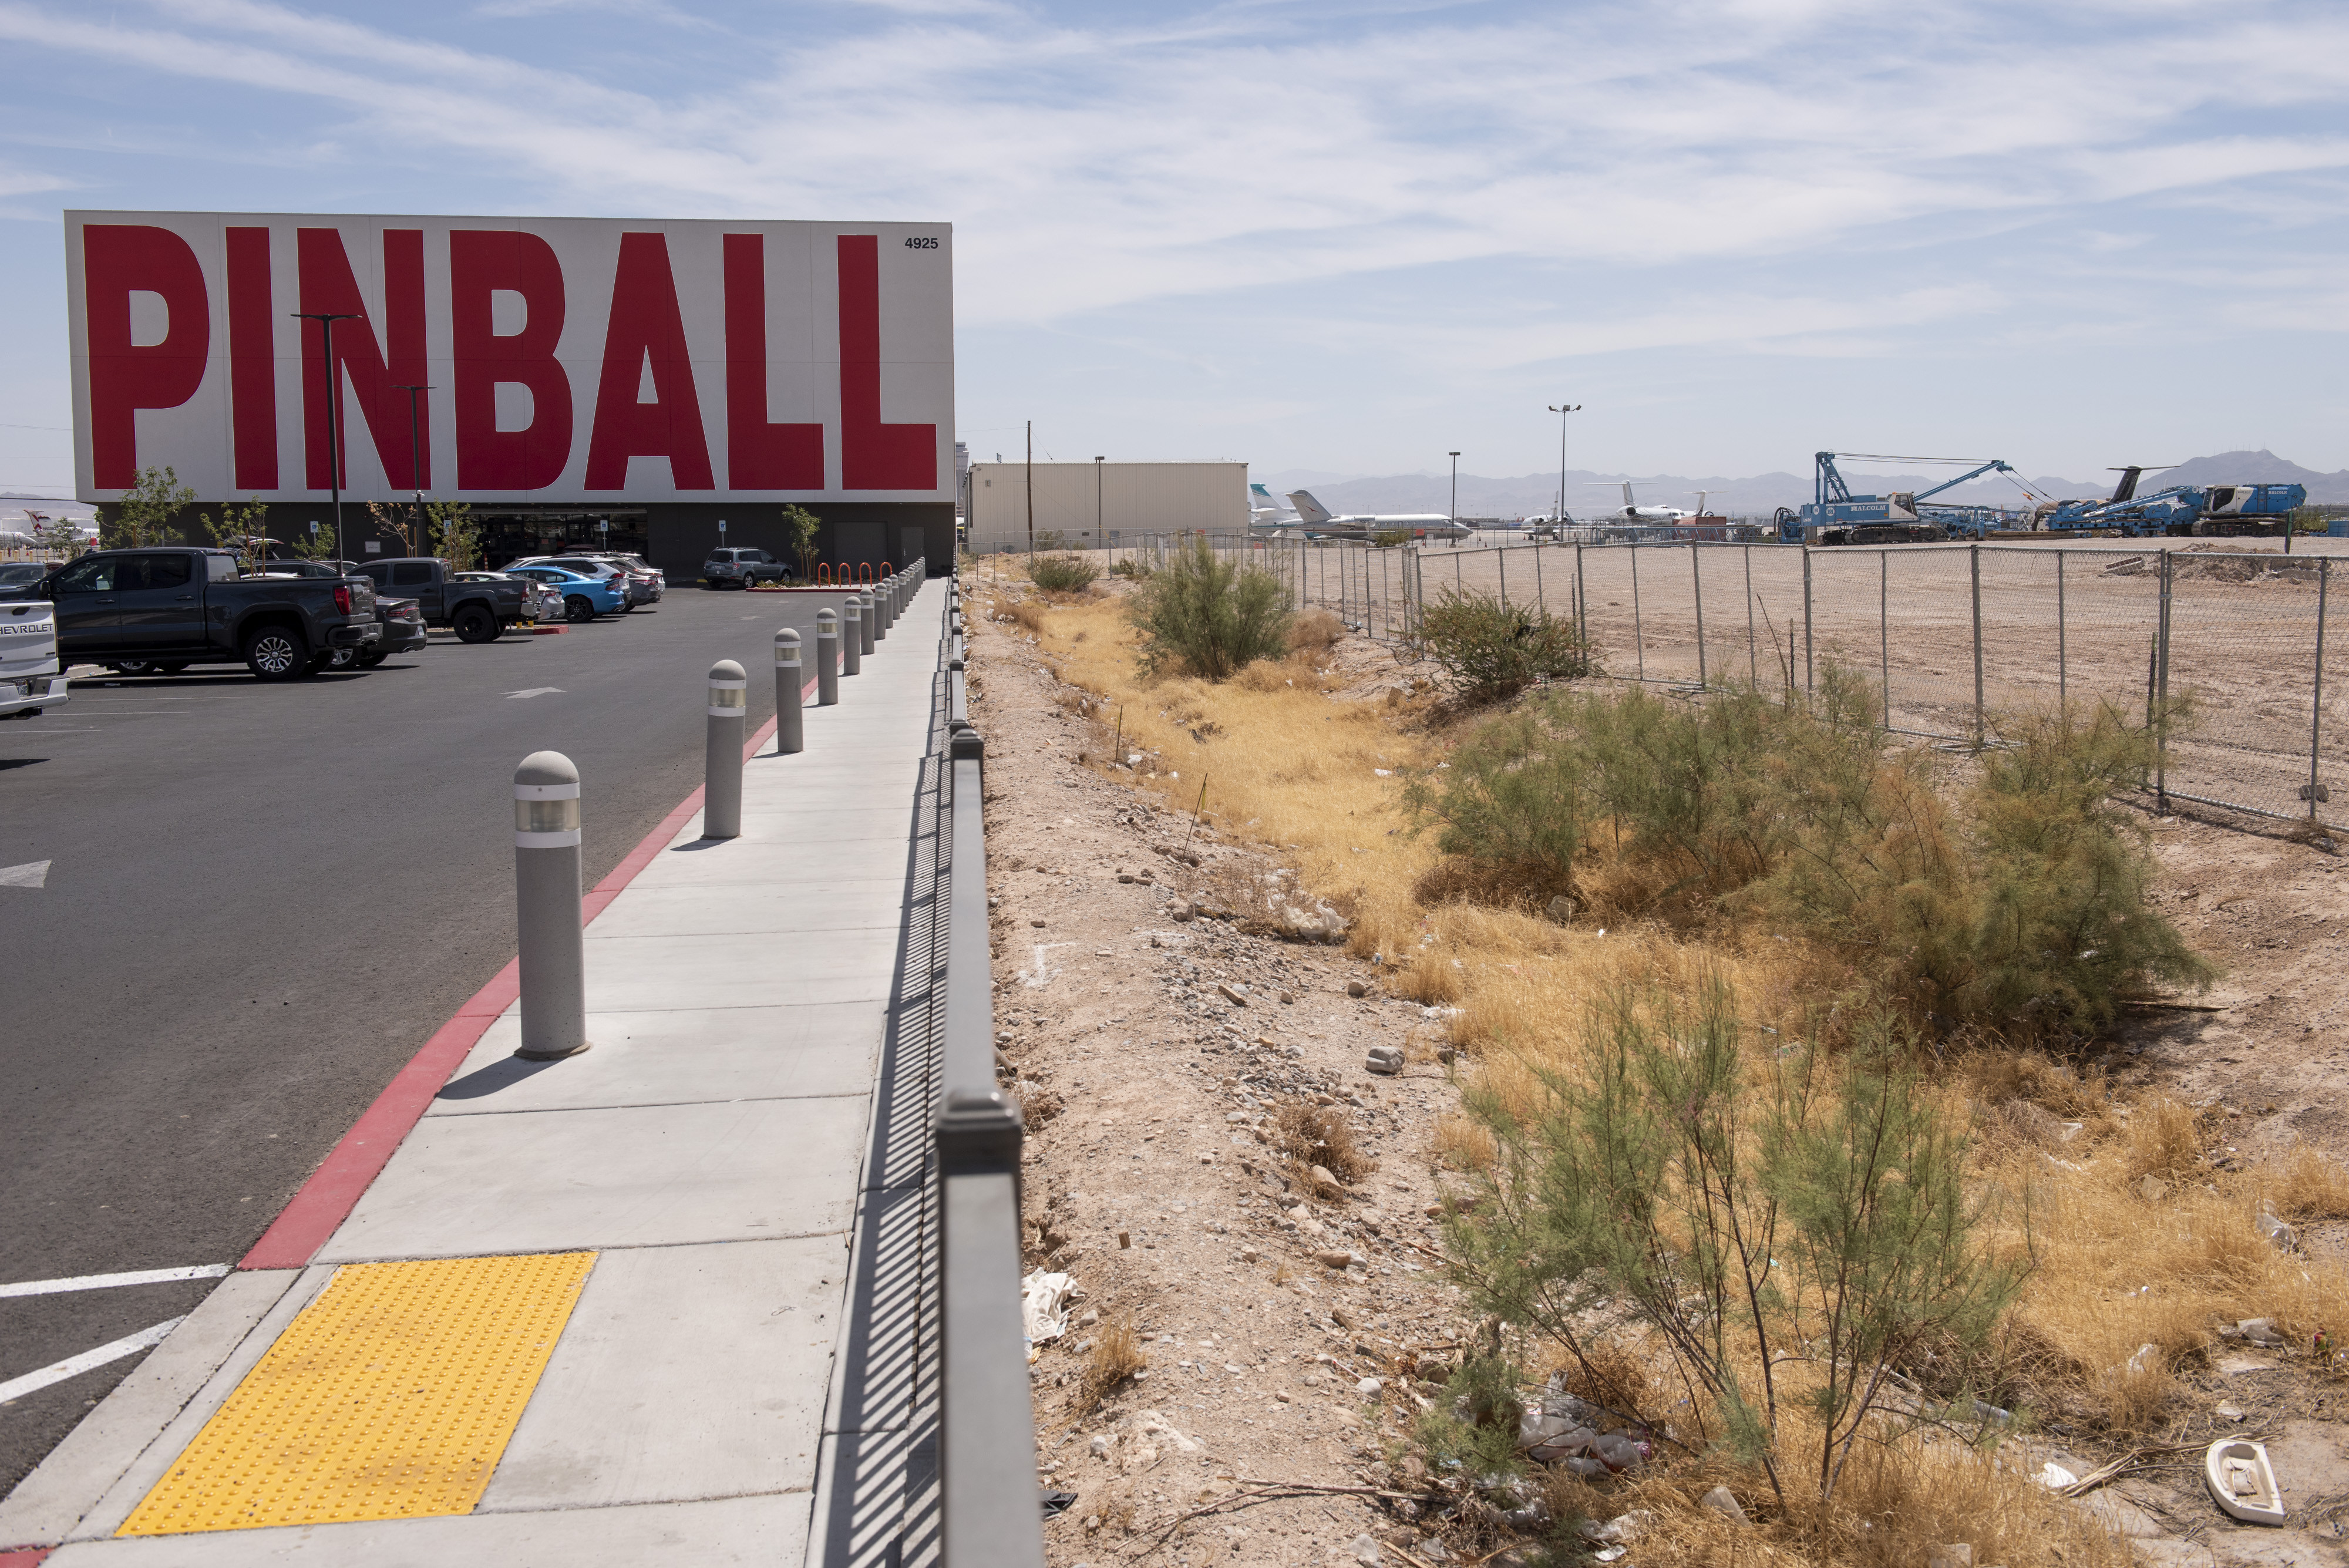 Pinball Hall of Fame seeks funds to finish new Las Vegas home